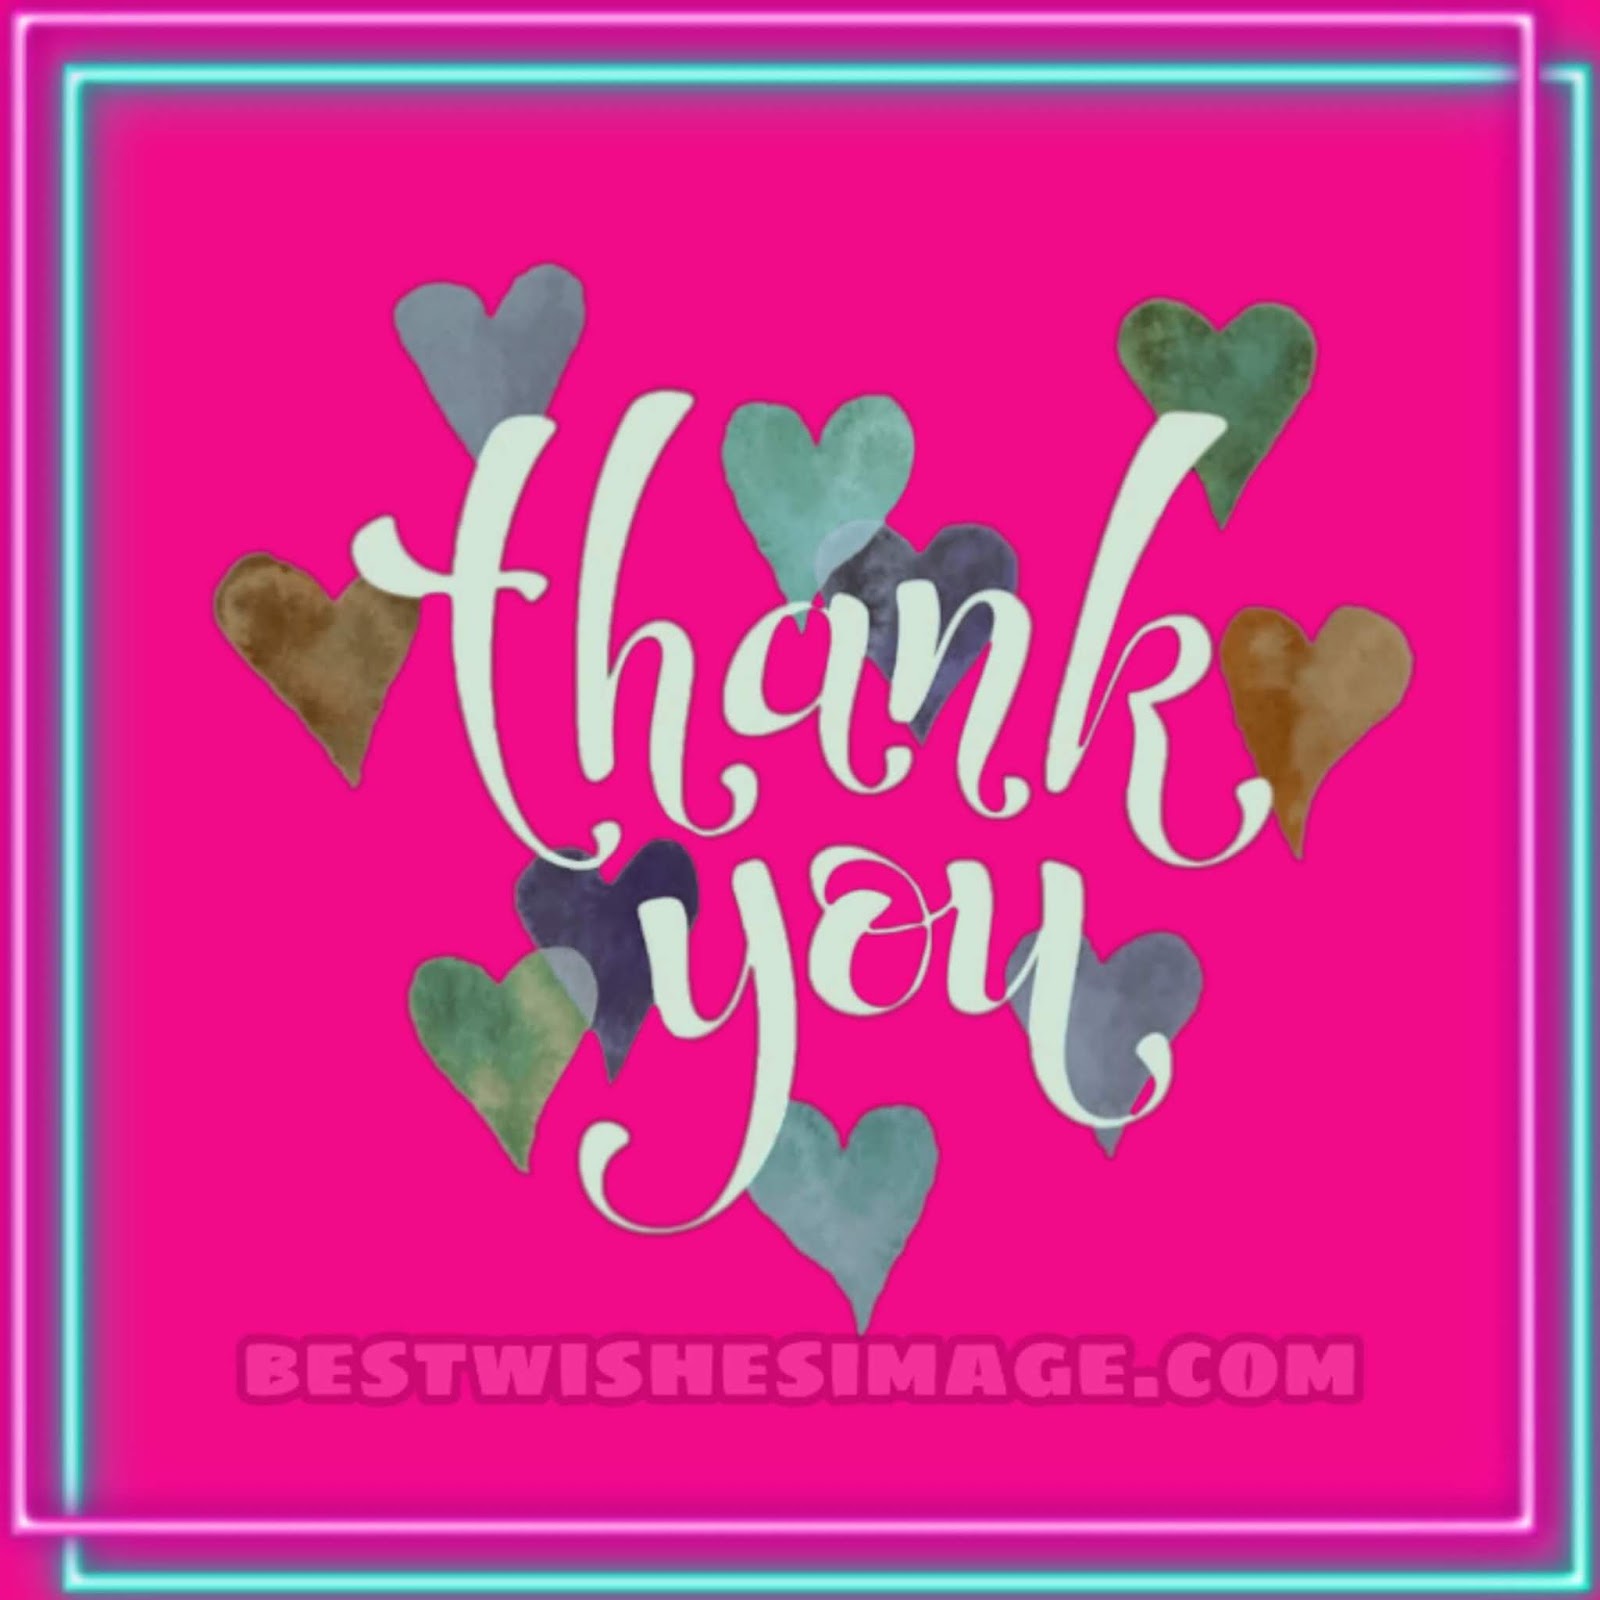 Thank you image for friends and family wishes image